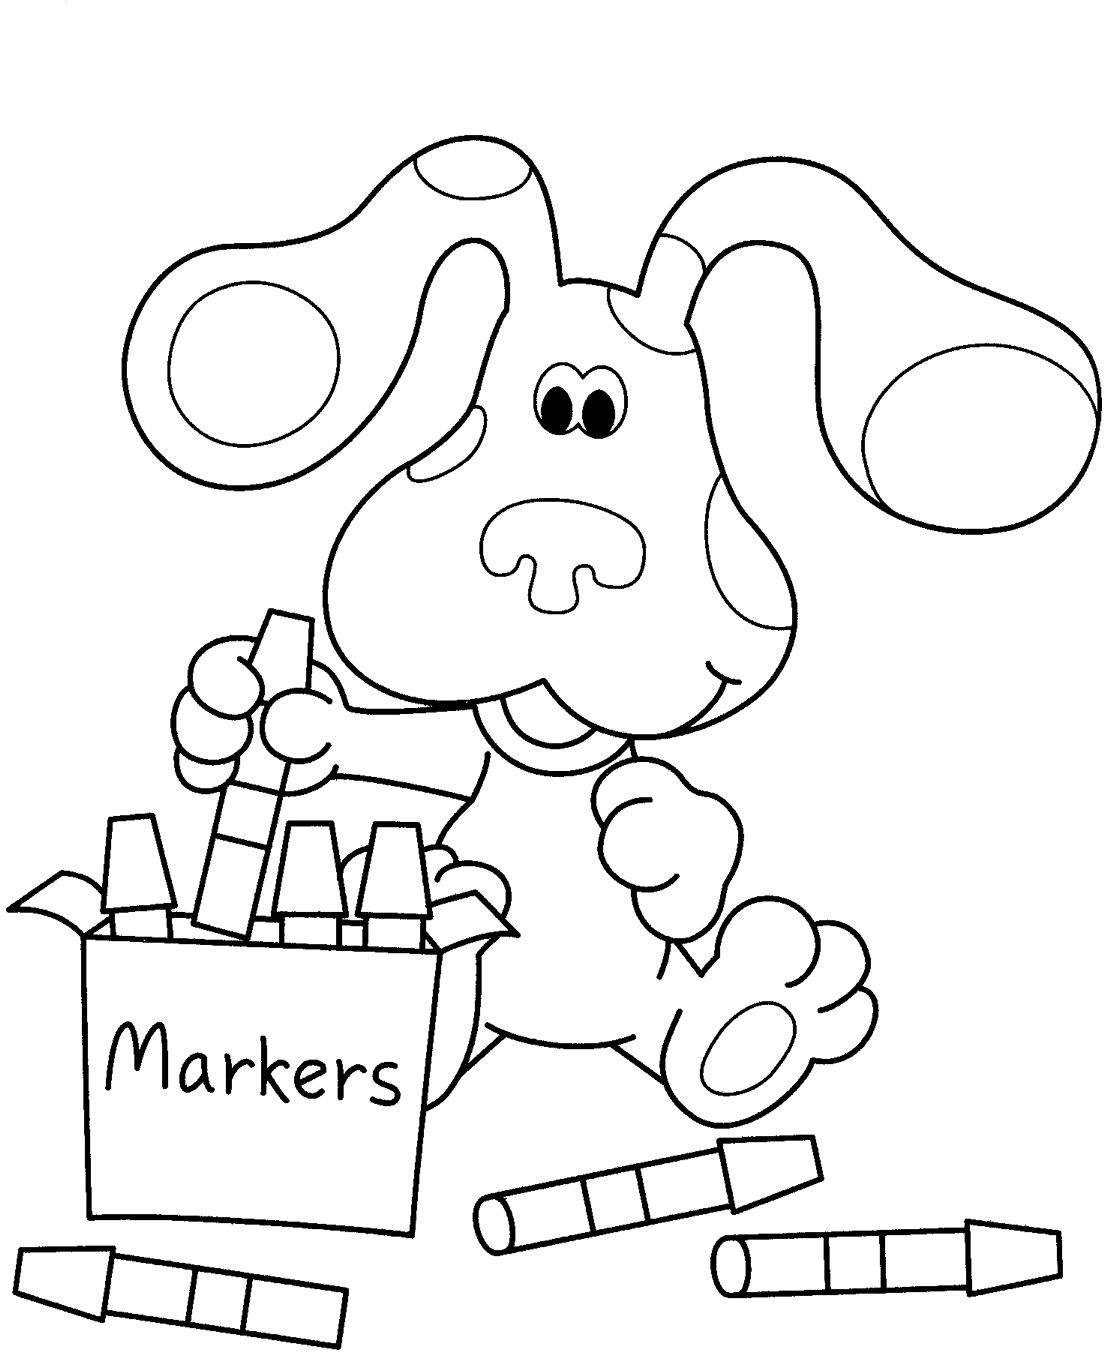 nickelodeon coloring pages online